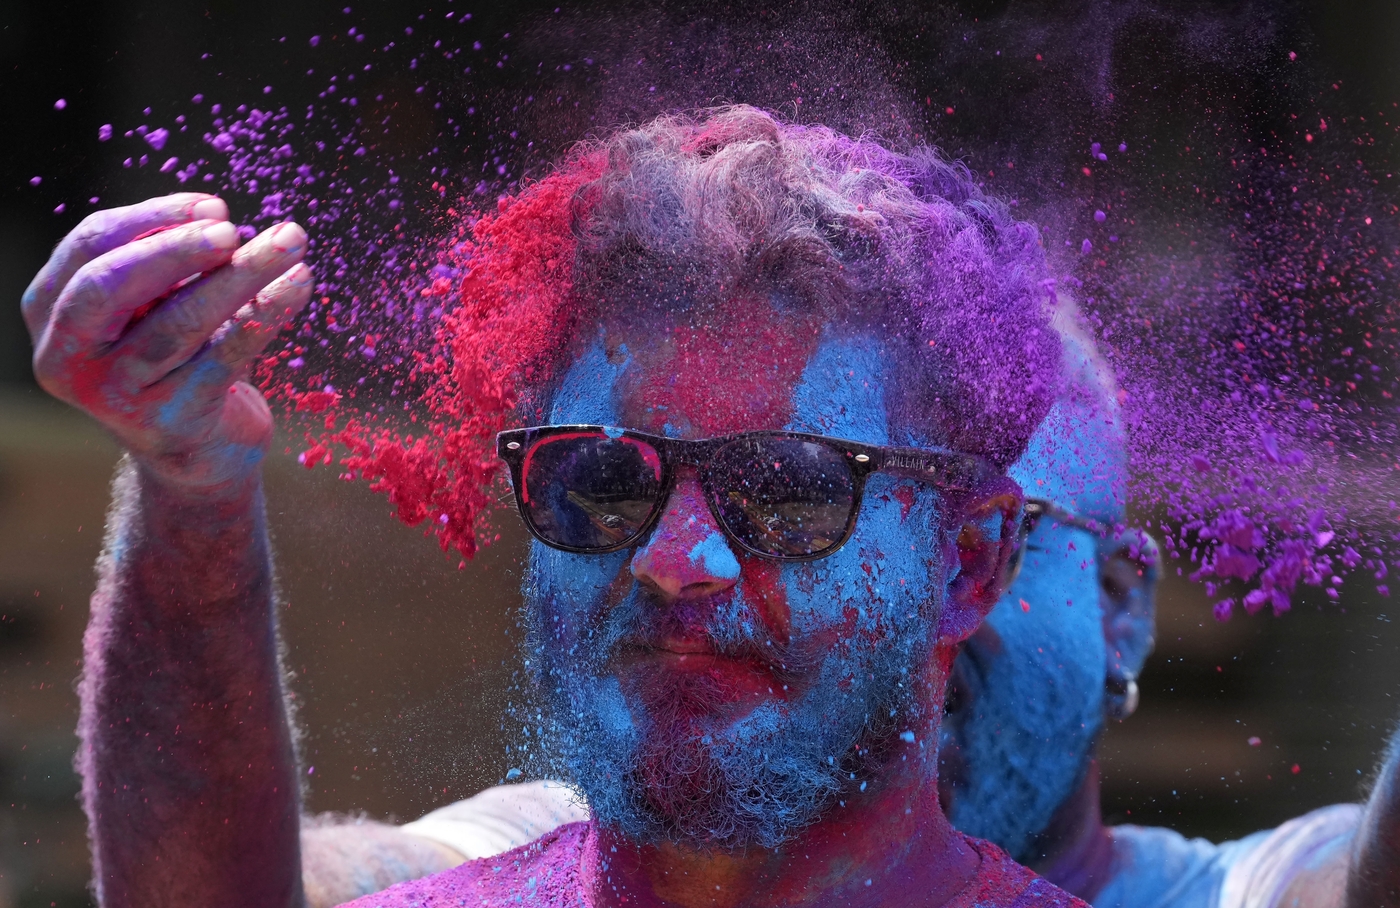 Colored powder is thrown on a reveller during celebrations marking Holi, the Hindu festival of colors, in Mumbai, India, Friday, March 18, 2022. (AP Photo/ Rajanish Kakade)